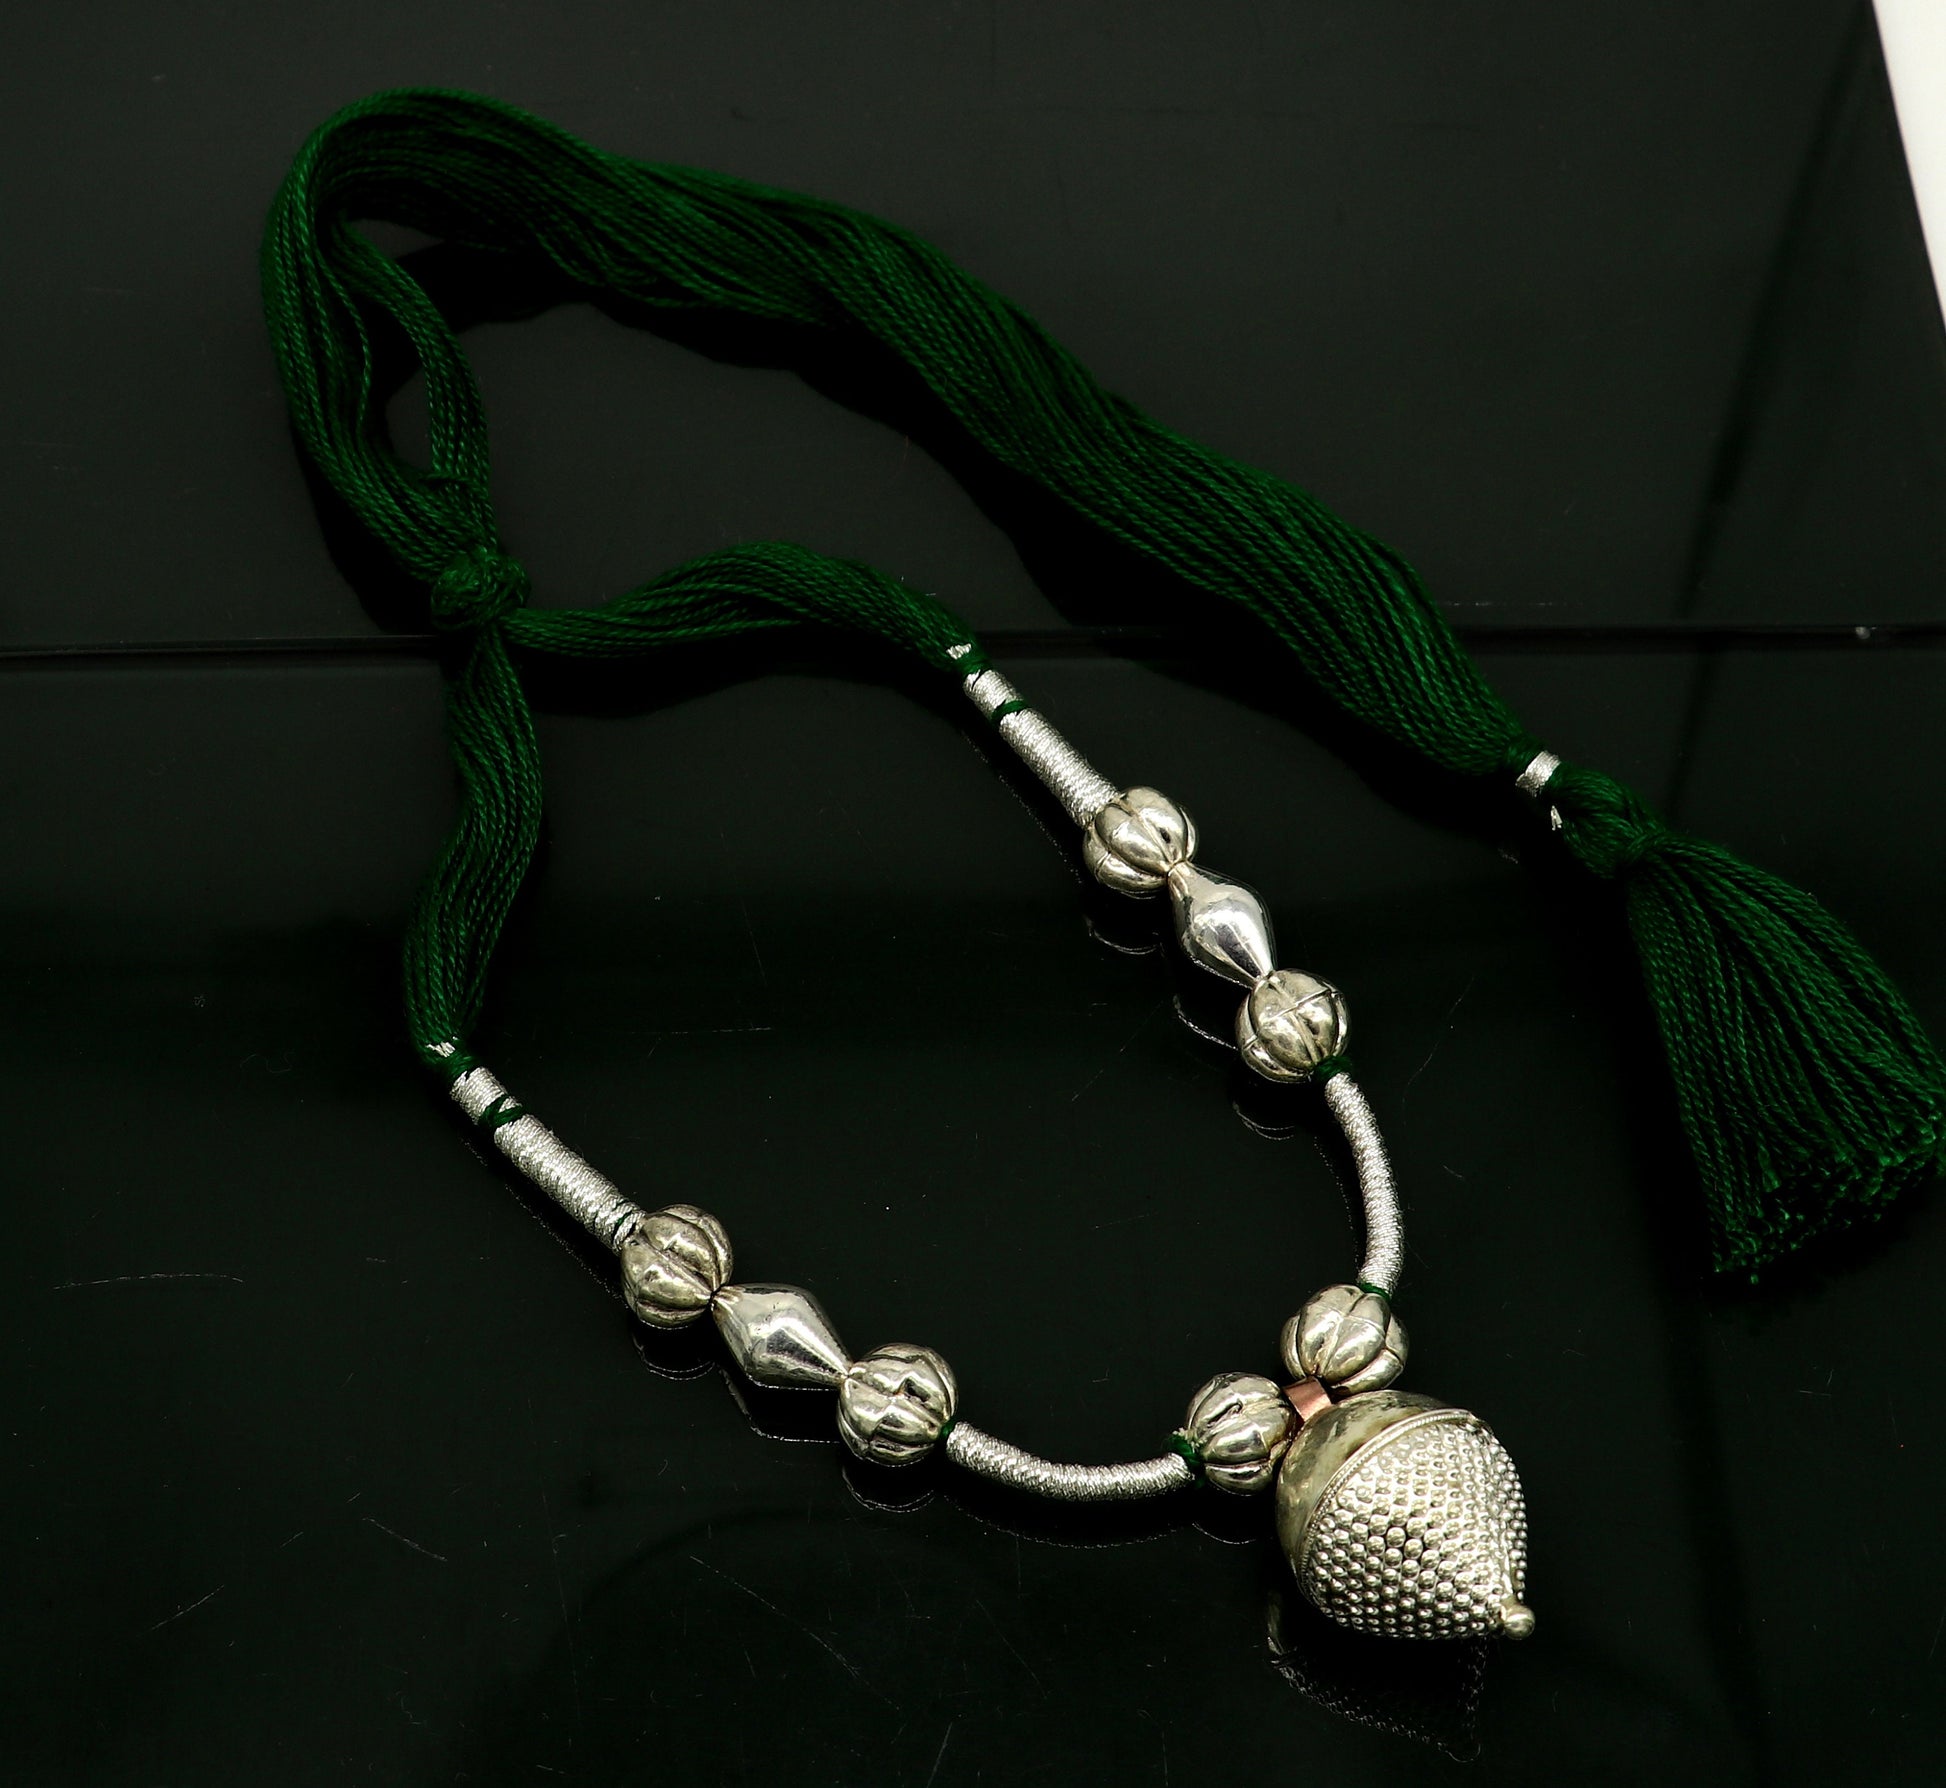 Amazing customized vintage style Sterling silver beads with Green thread charm necklace, wedding choker tribal adjustable jewelry set190 - TRIBAL ORNAMENTS